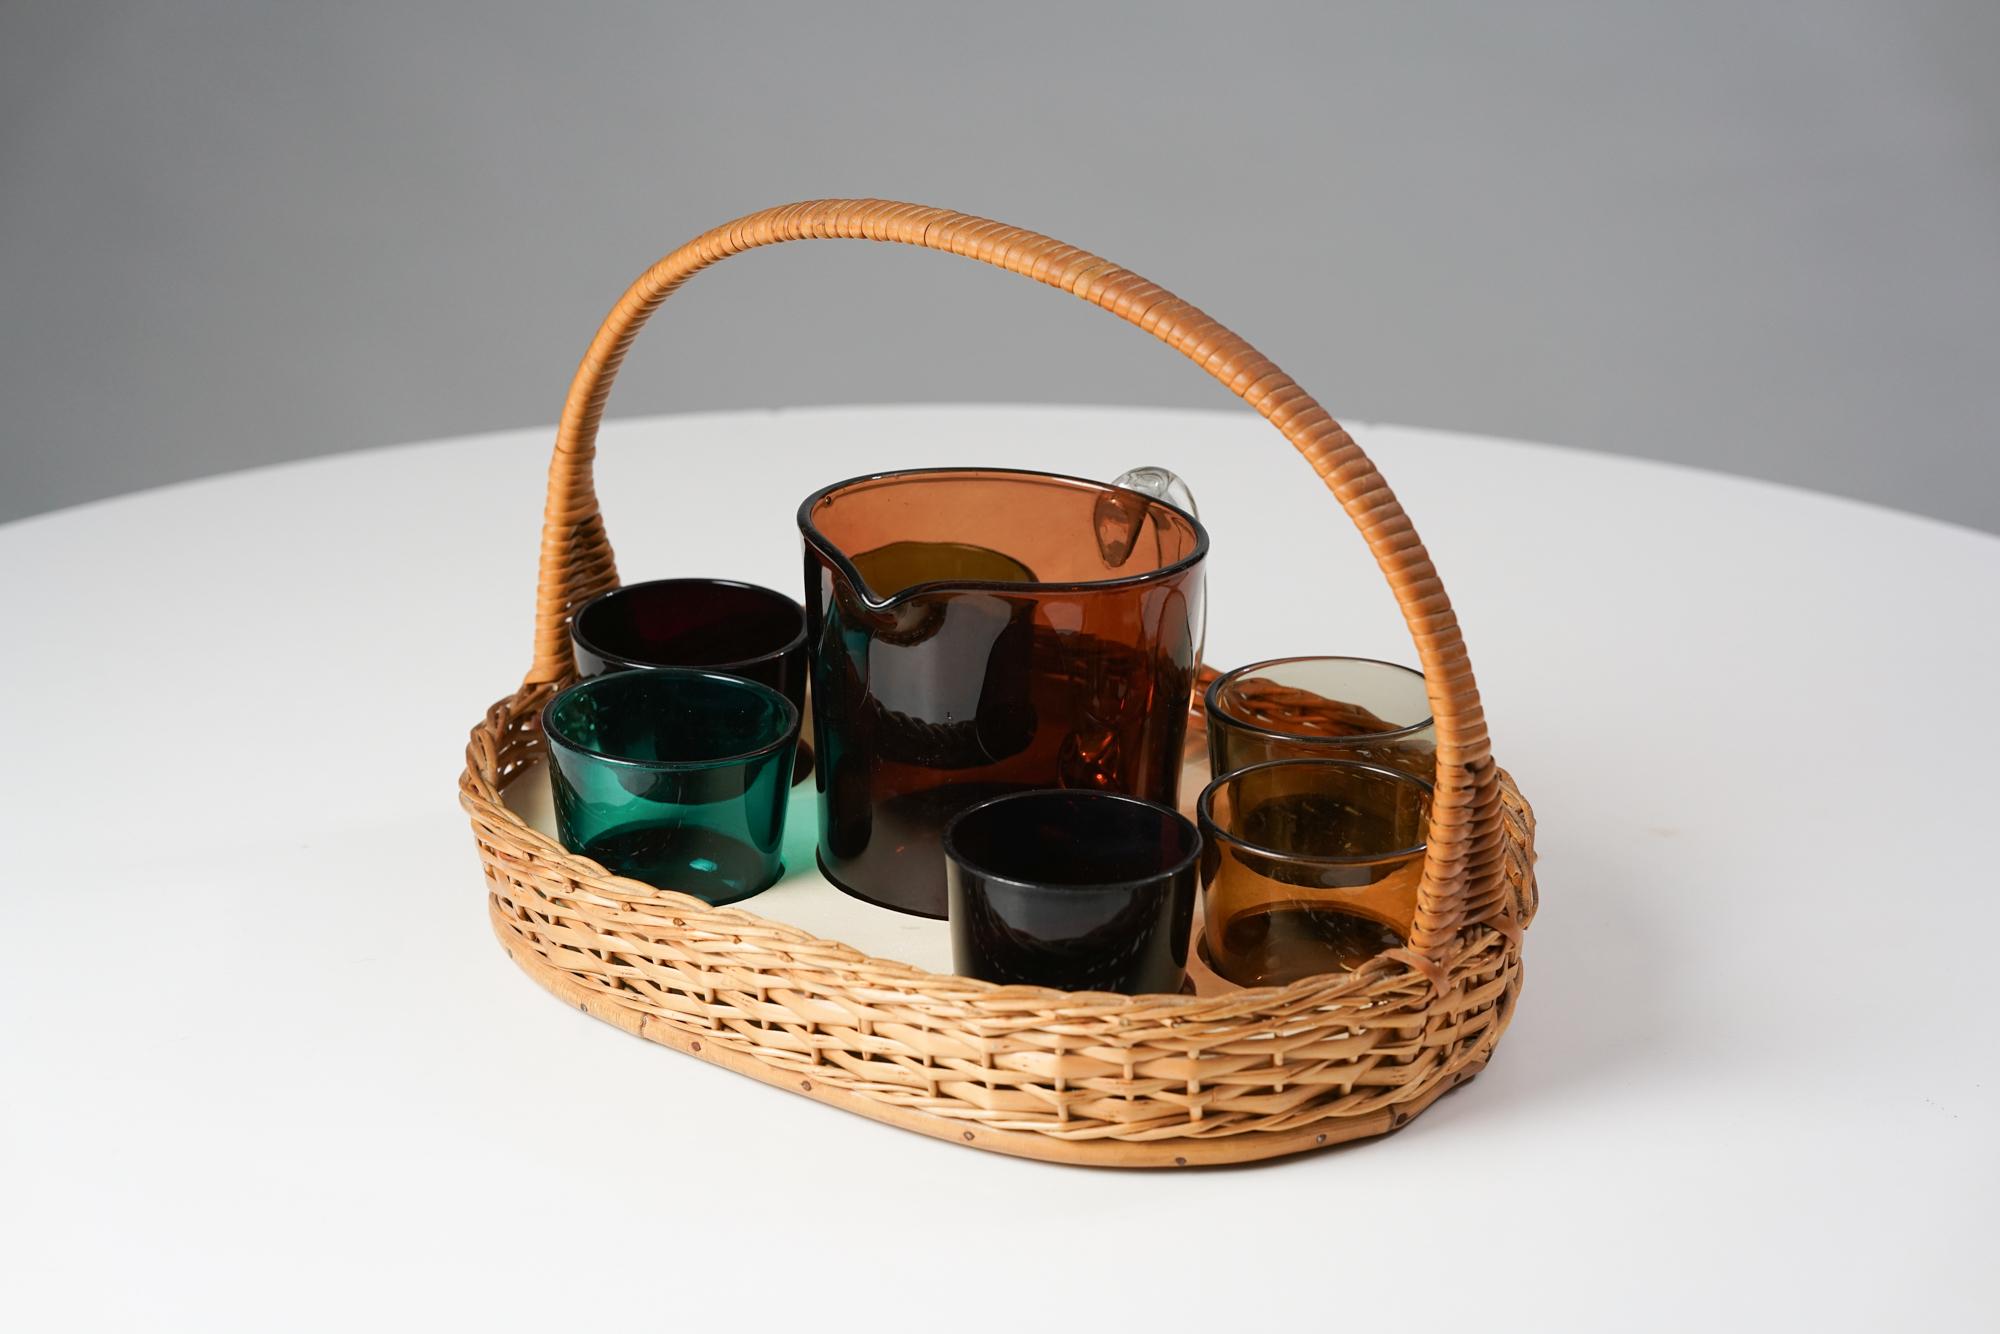 Juice set by Kaj Franck for Nuutajärvi Notsjö from the 1950s. Designed in 1954. The set includes willow basket with rattan wrapped handle, six glasses and a vase. Different colors on the glasses. Good vintage condition, minor patina and wear